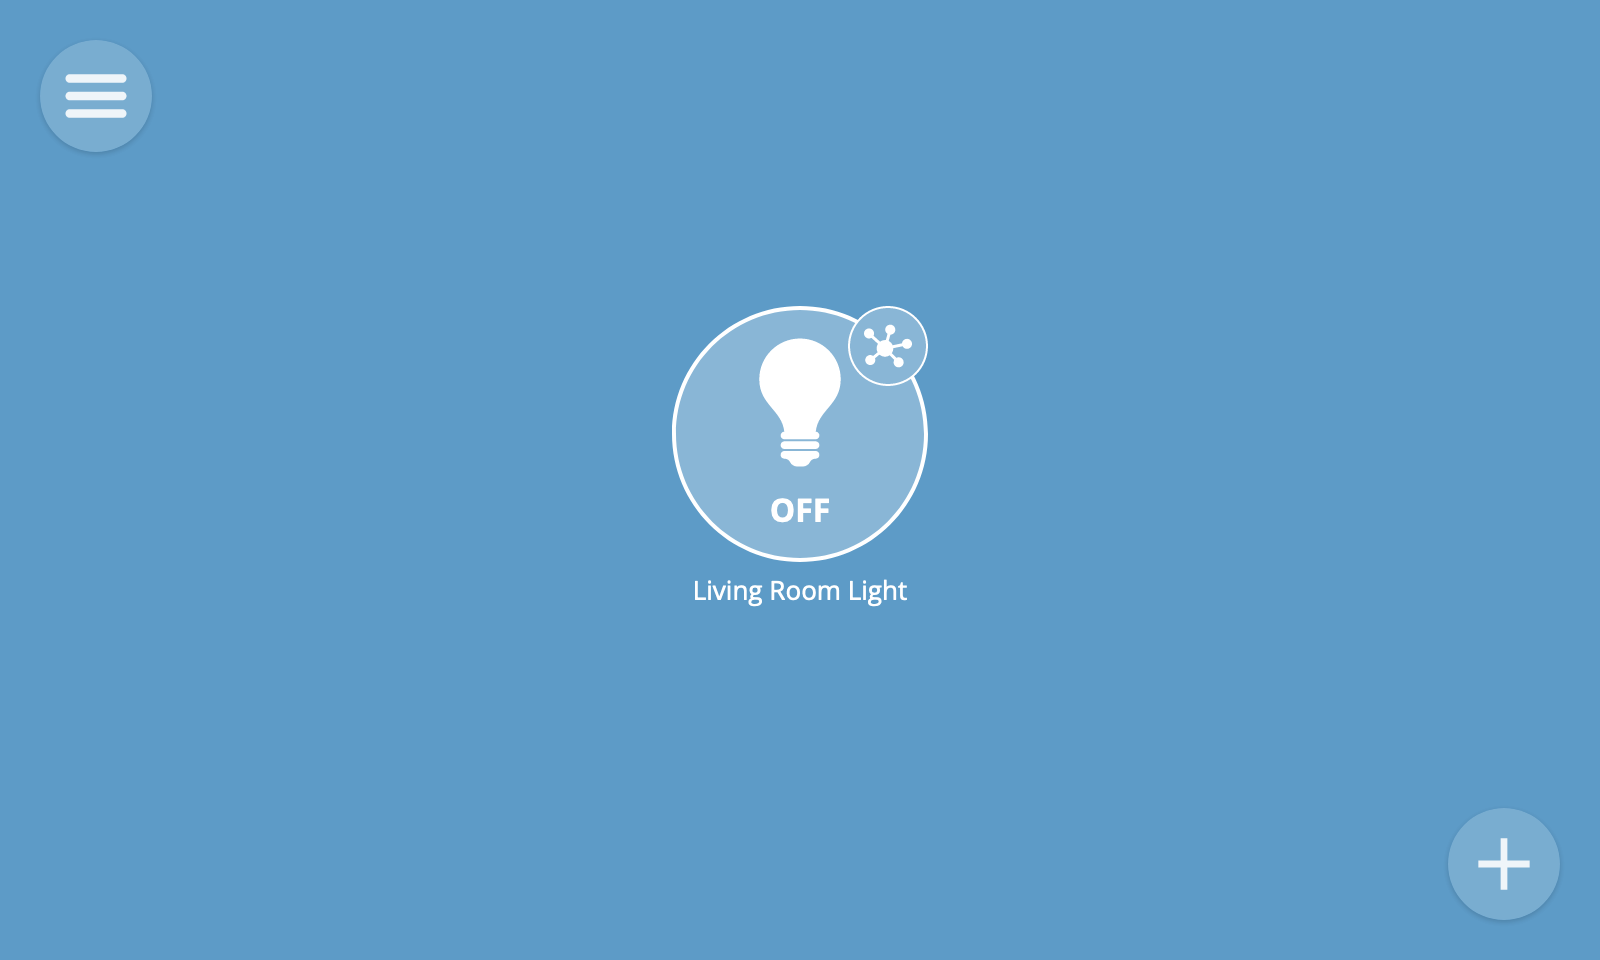 A screenshot showing an icon for a Living Room Light